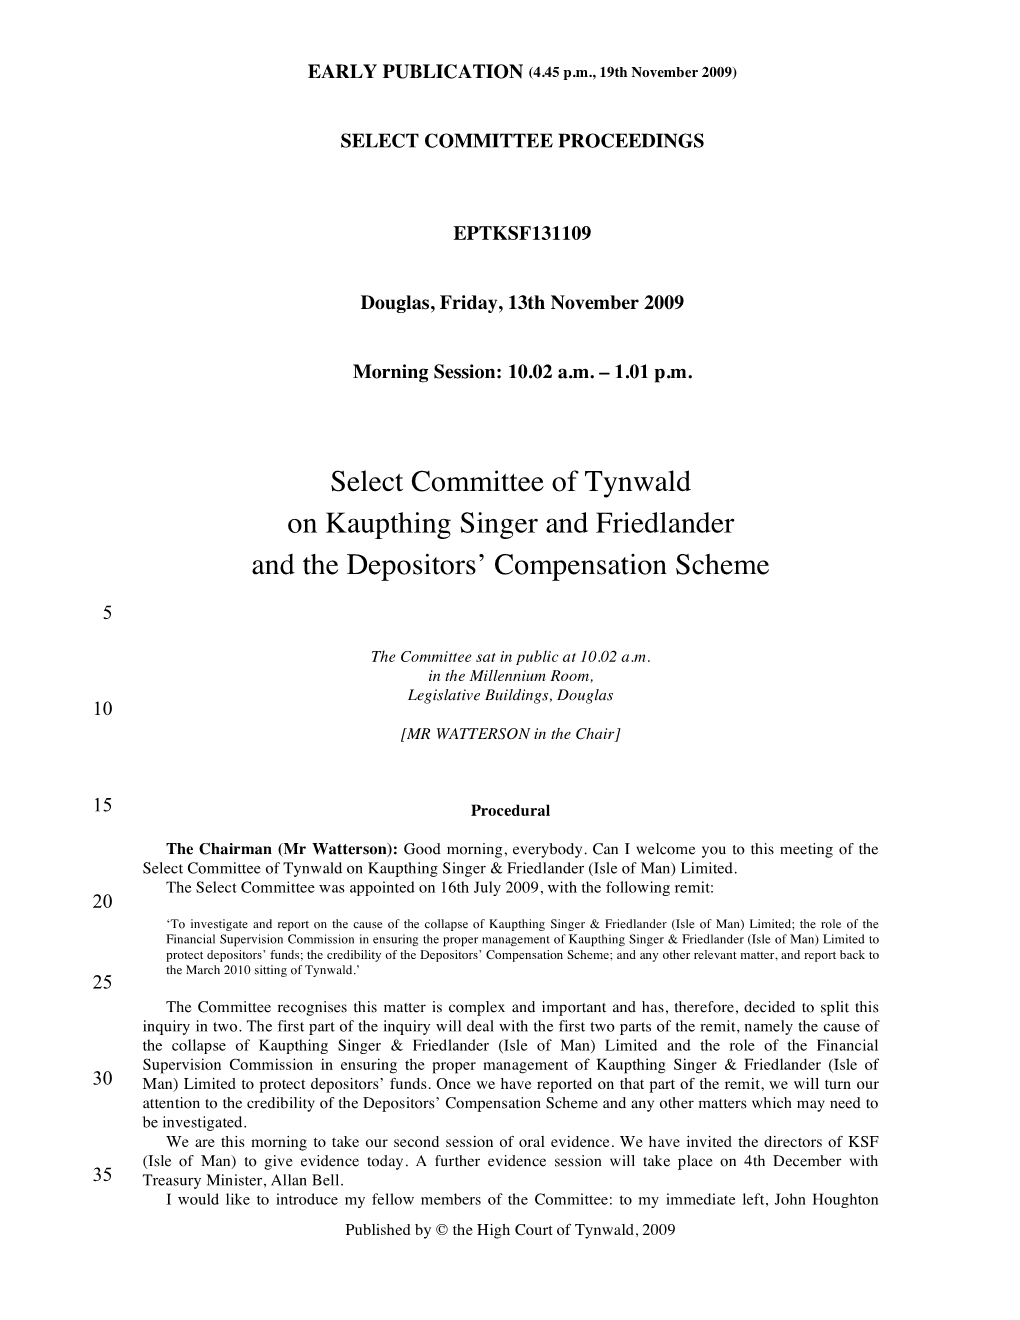 Select Committee of Tynwald on Kaupthing Singer and Friedlander and the Depositors' Compensation Scheme